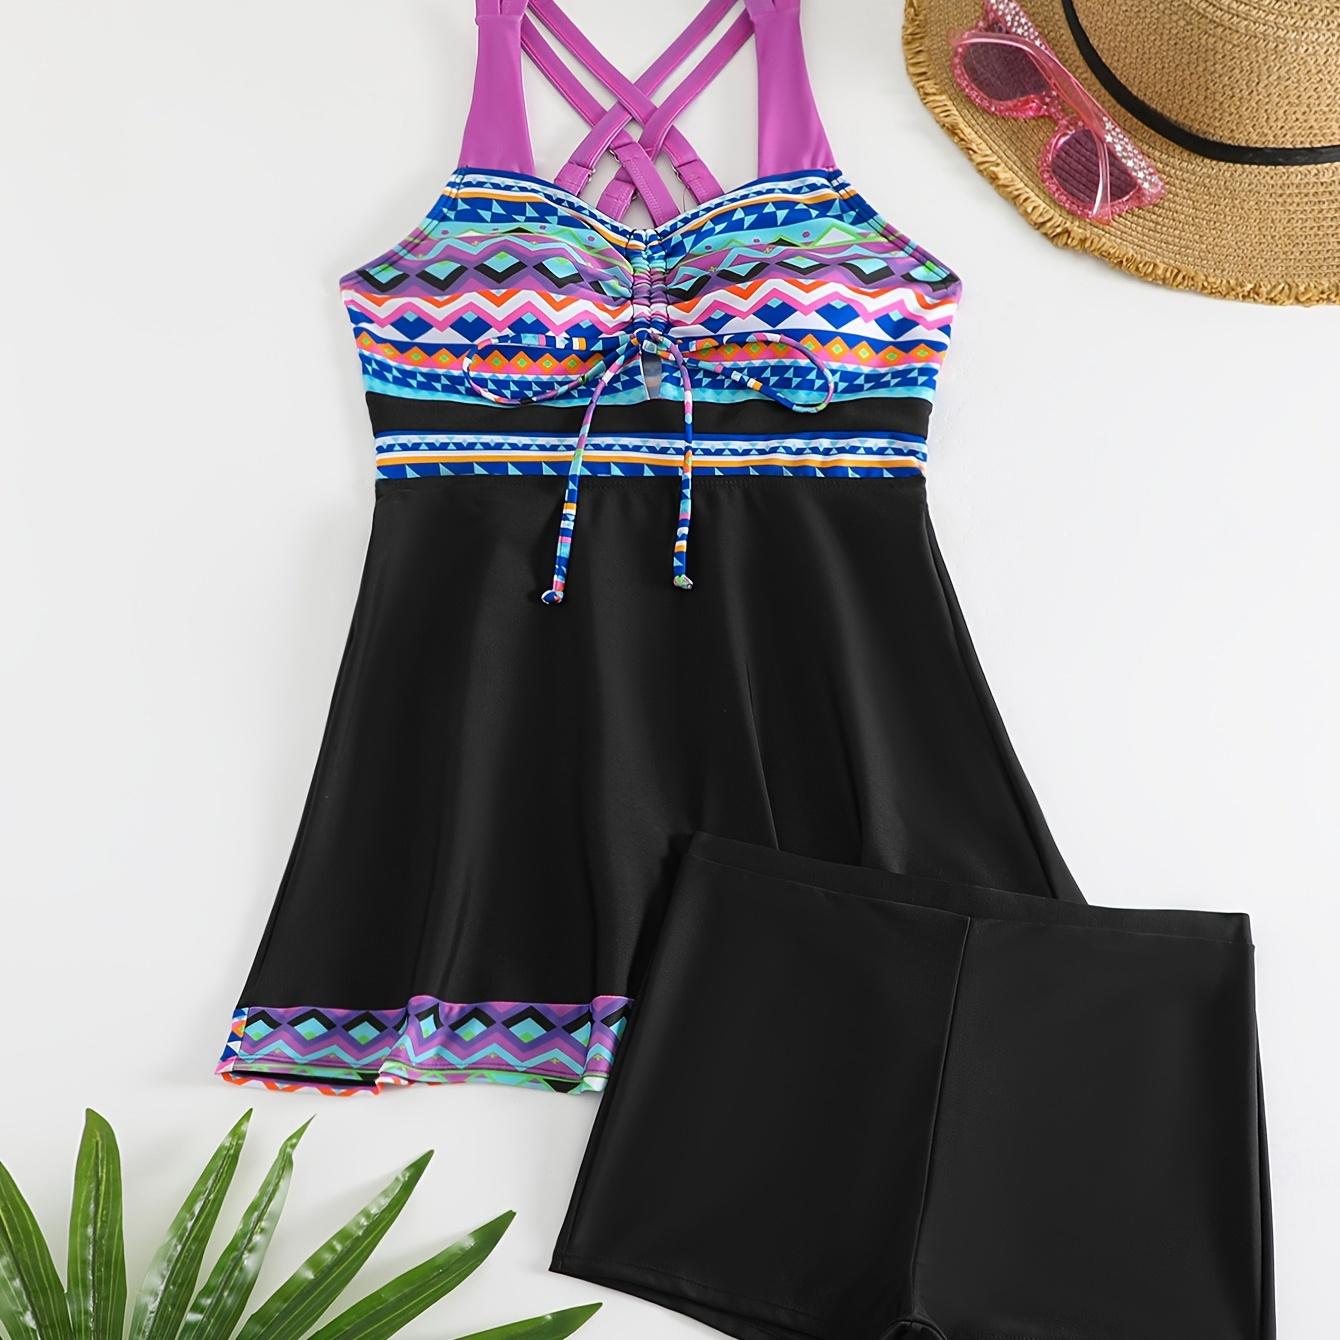 

Geometric Print Tie Front Criss Cross 2 Piece Set Tankini For Beach Bathing Pool, Wide Strap High Stretch Skirted Tank Top & Solid Black Boxer Shorts Bottoms, Women's Swimwear & Clothing